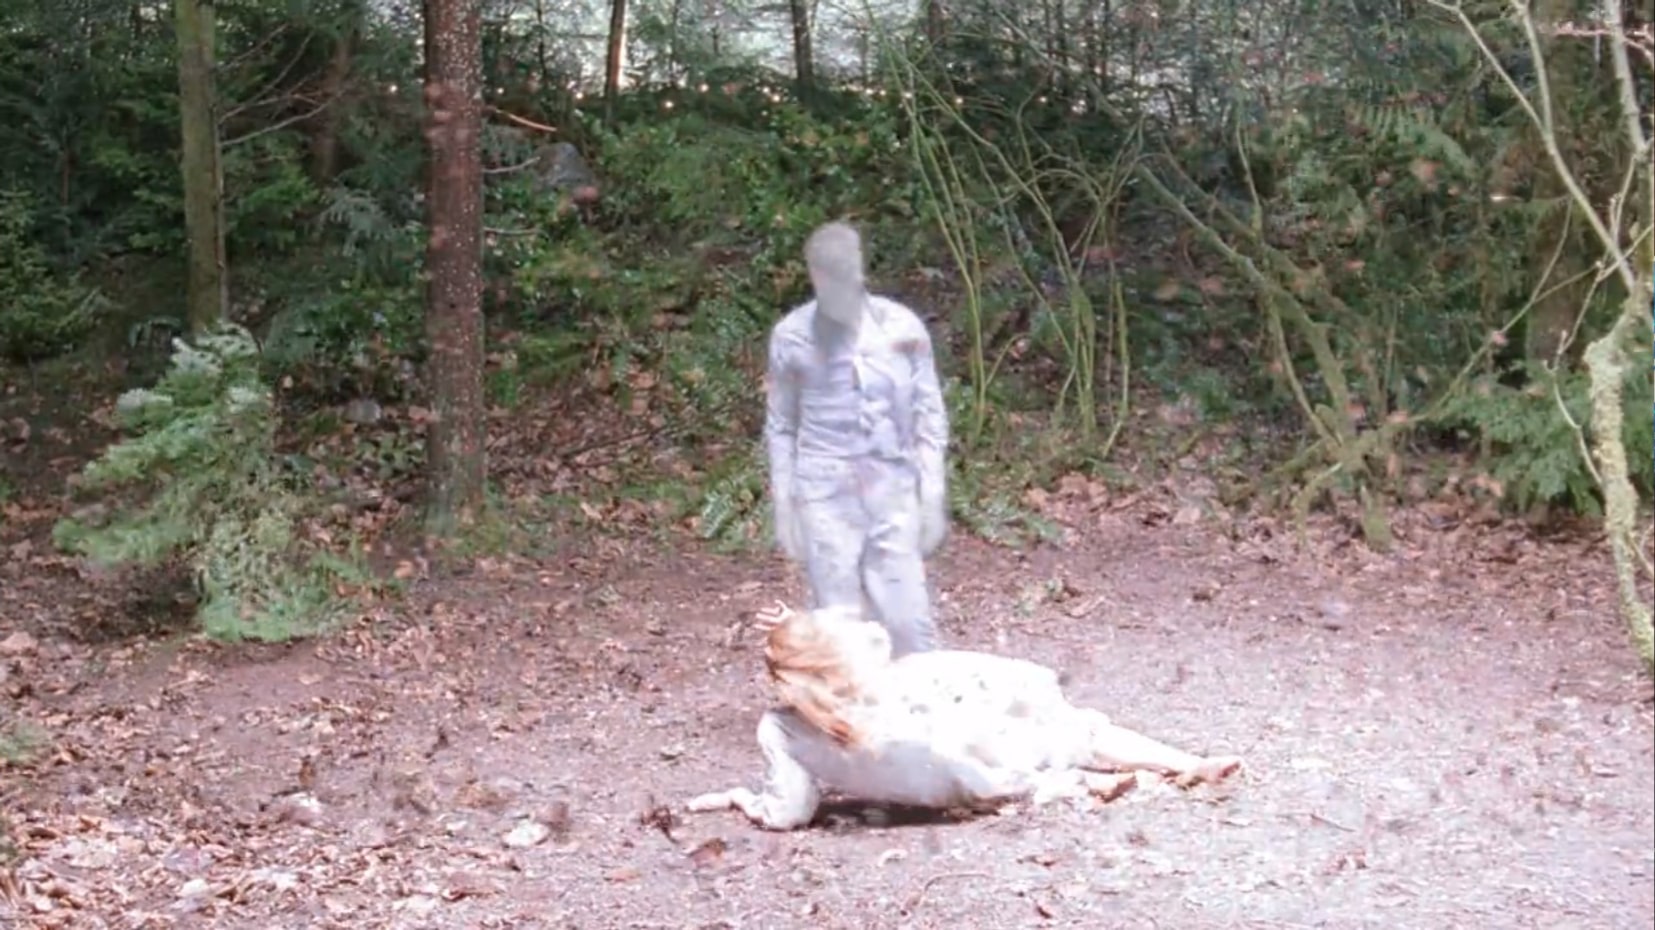 A girl in a white night dress is on the ground in a forest clearing her back to us as she cowers before what appears to be a man made of static. He is wearing a button up shirt, though the color is not clear as his form appears to be washed out. An intense unnatural light shines down on them from above. The wind is cycloning around them, making the leaves fly through the air.